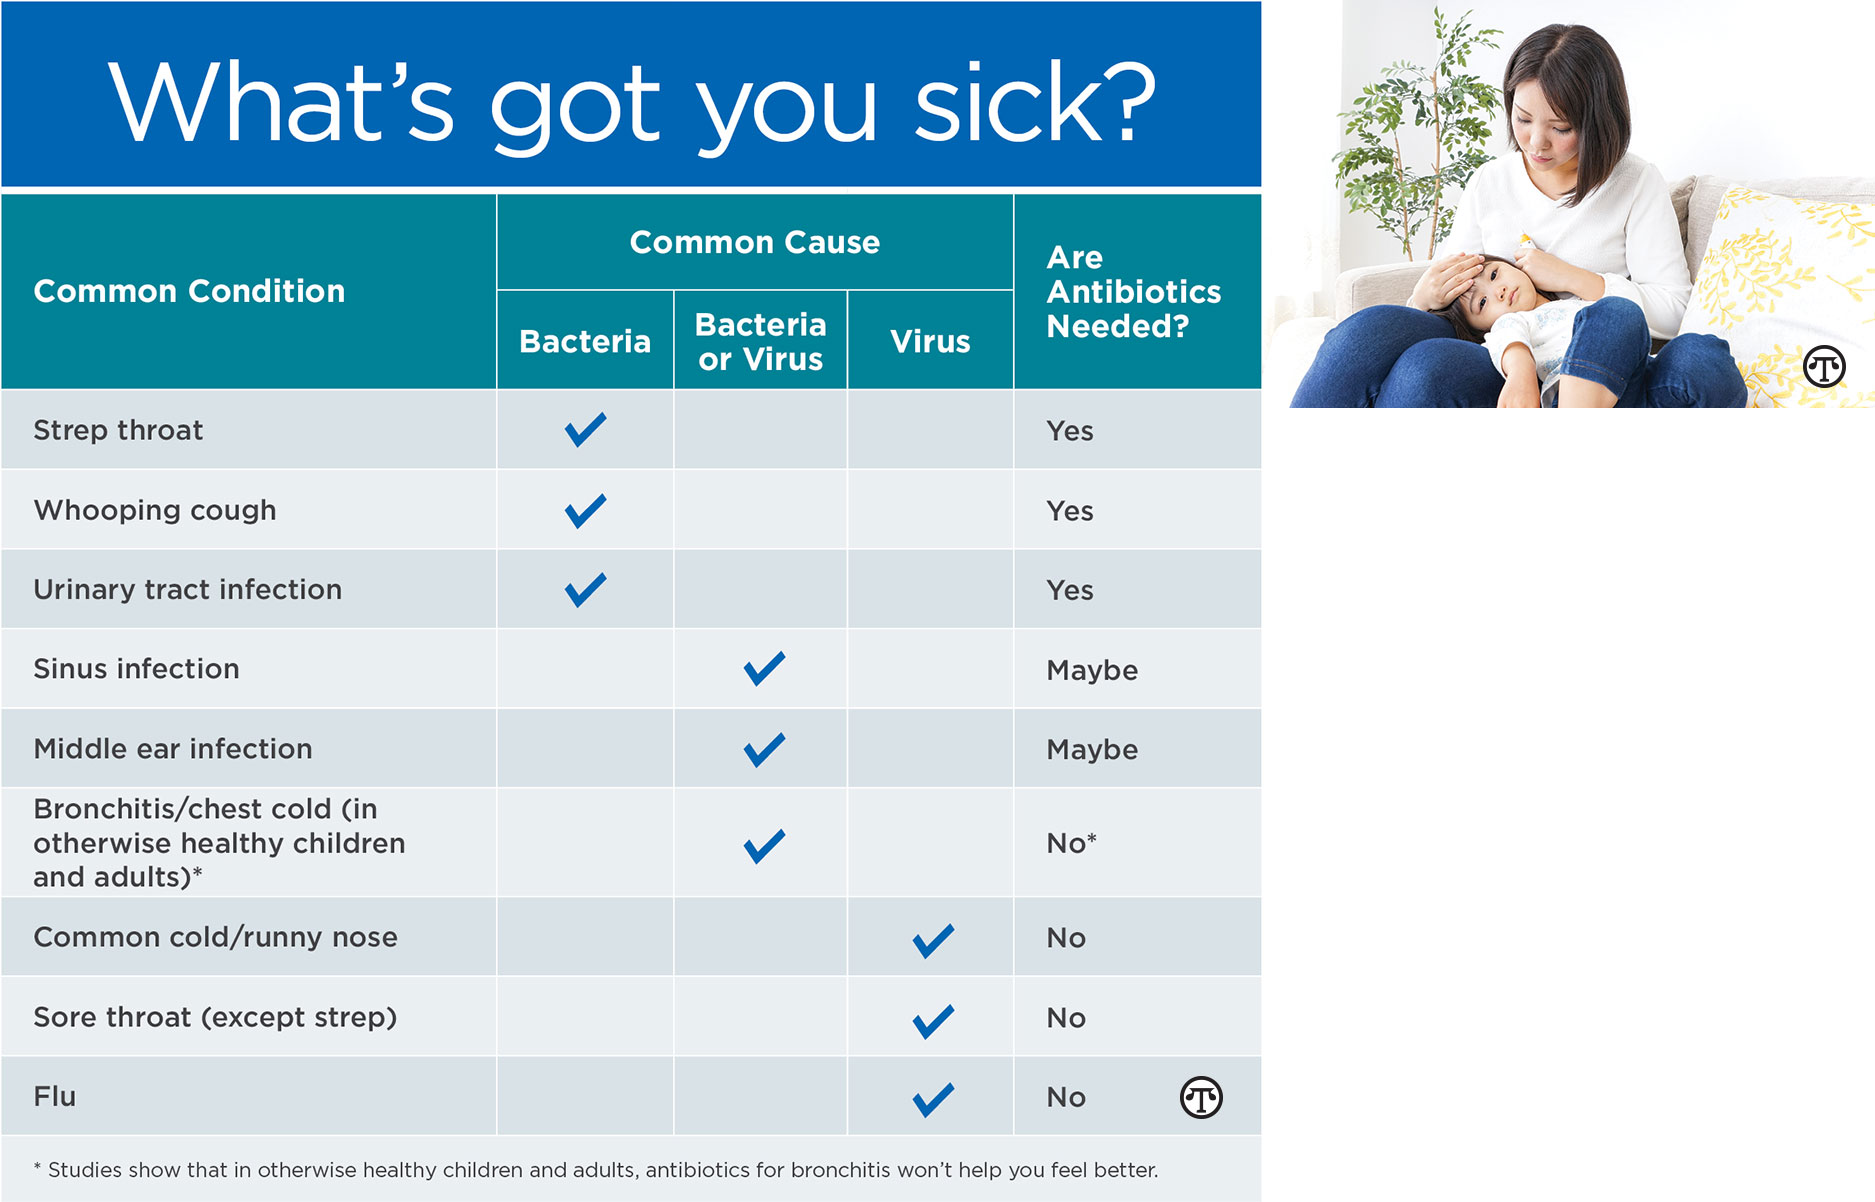 Children and adults 65 years and older are most susceptible to the flu, but vaccinations can protect you and your family.